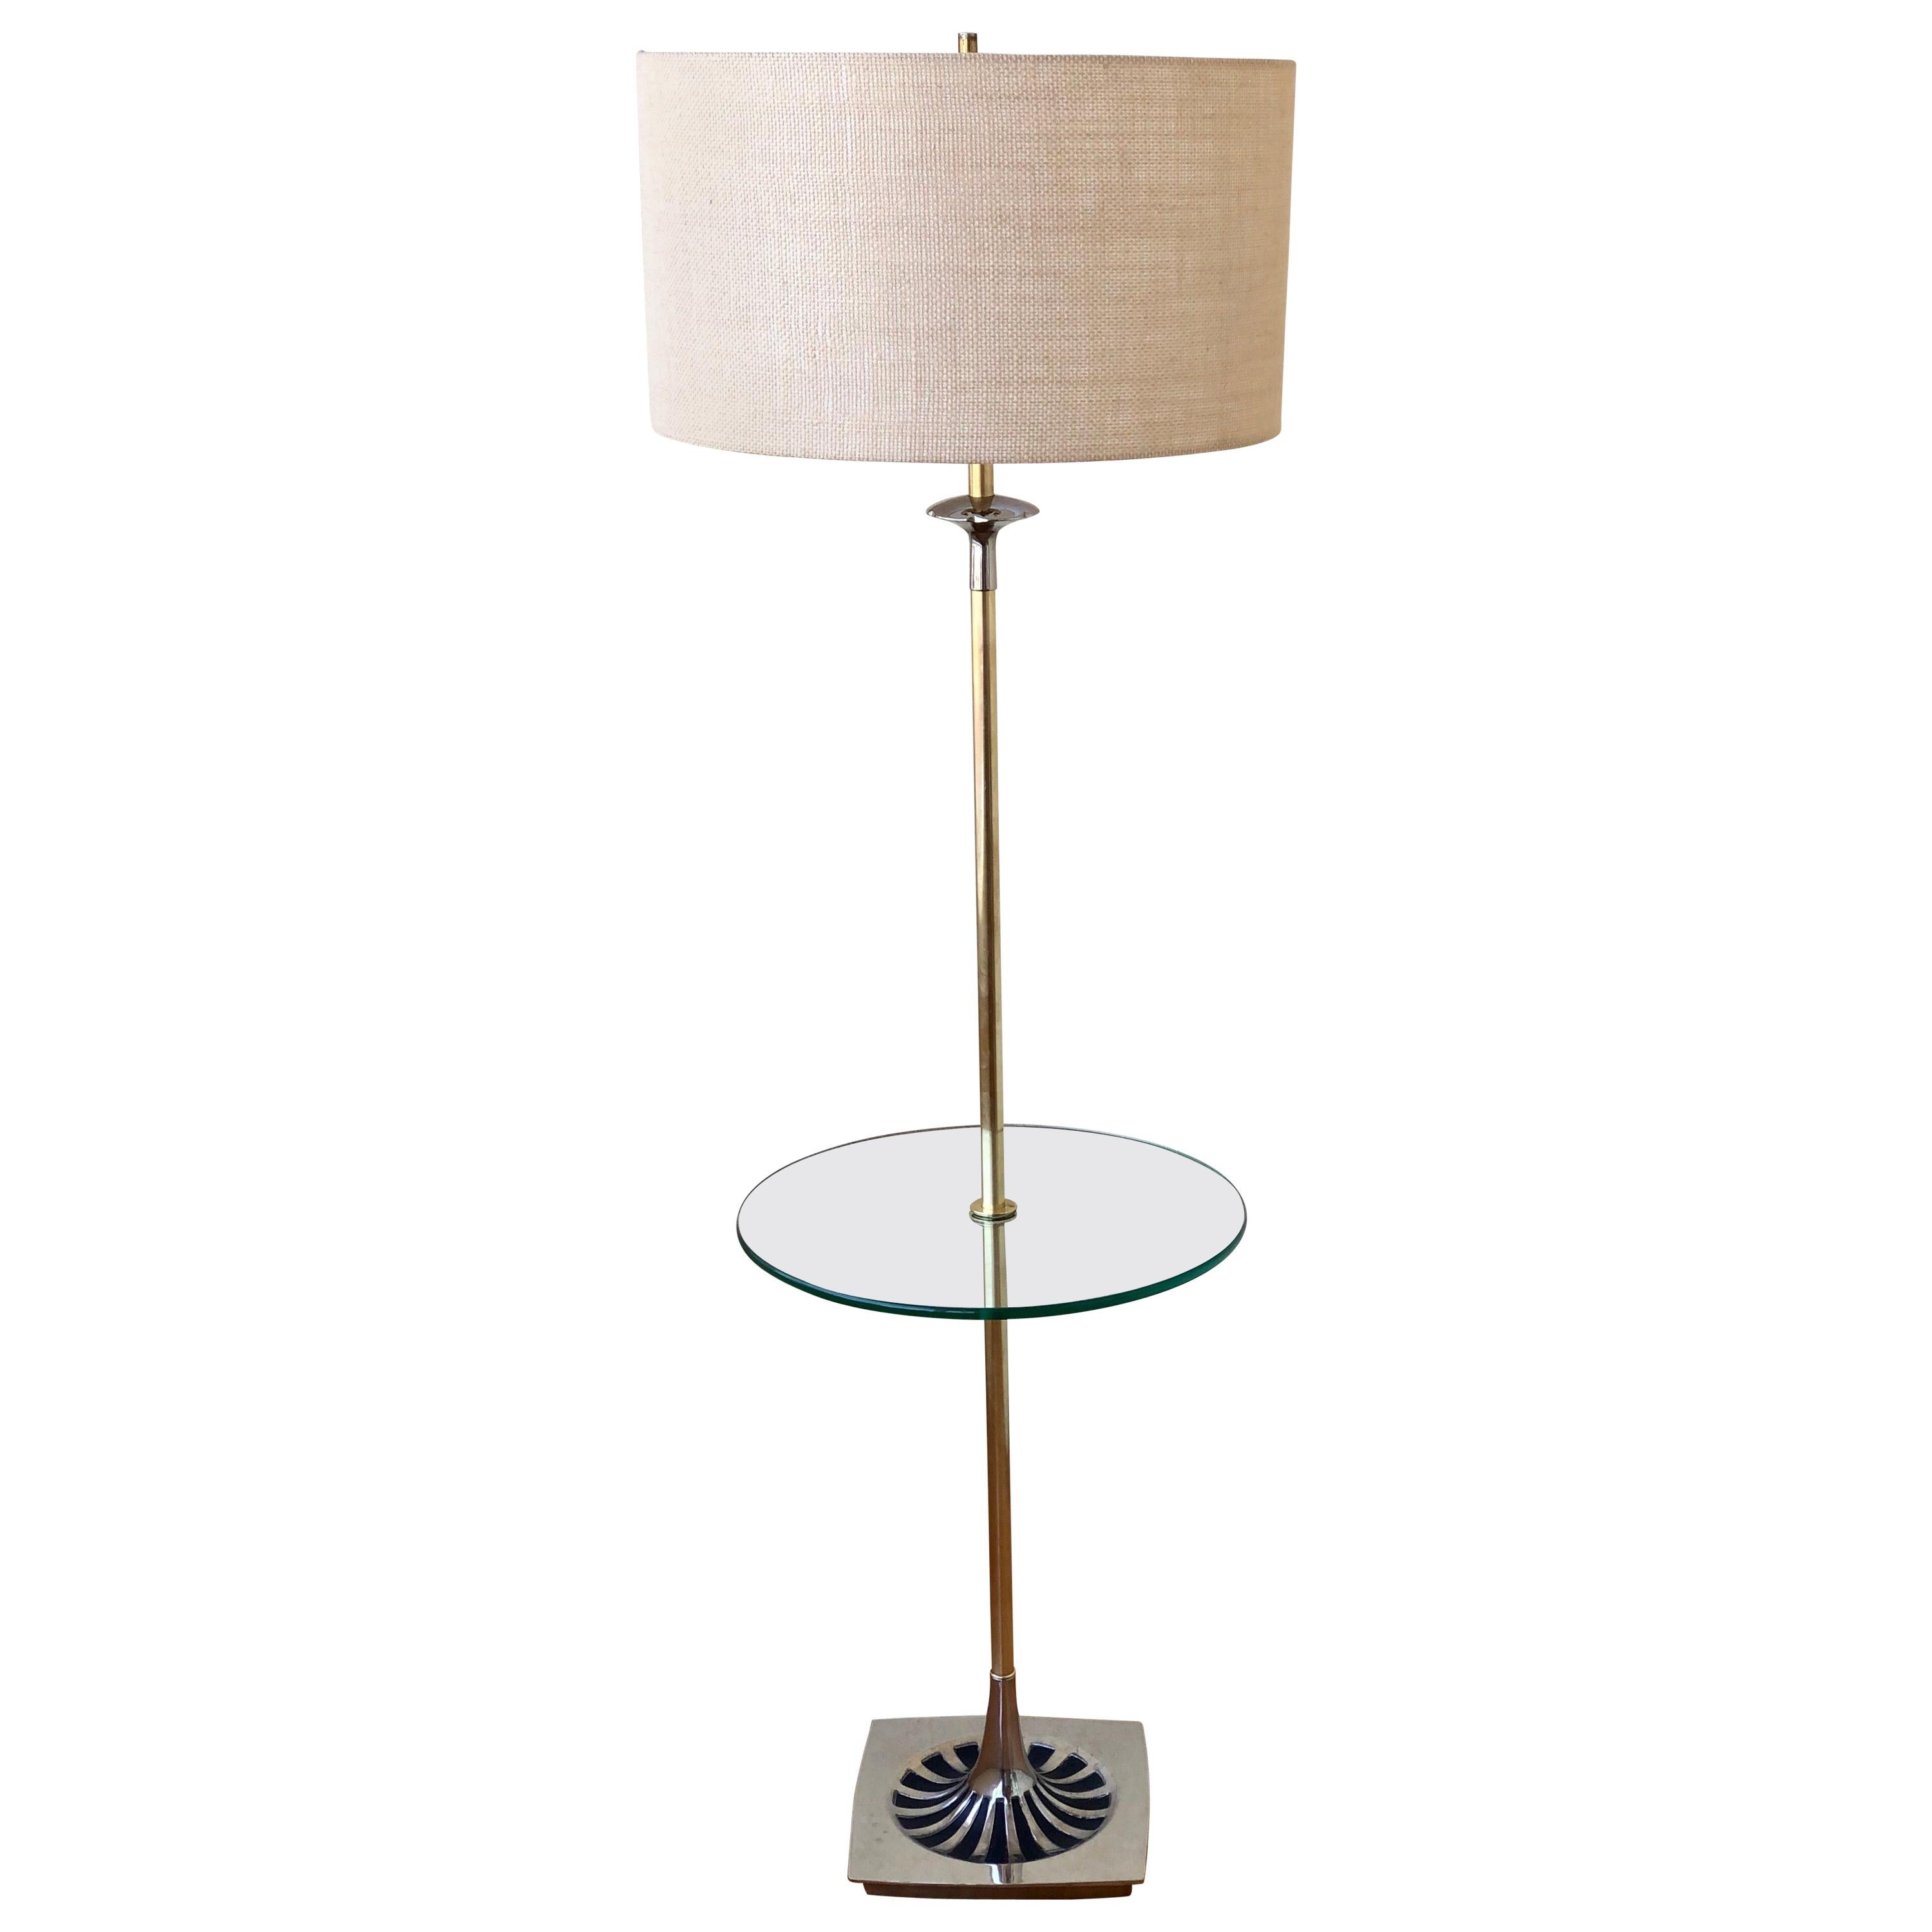 Polished Brass and Chrome Rare Table or Floor Lamp by Laurel Lamp Company